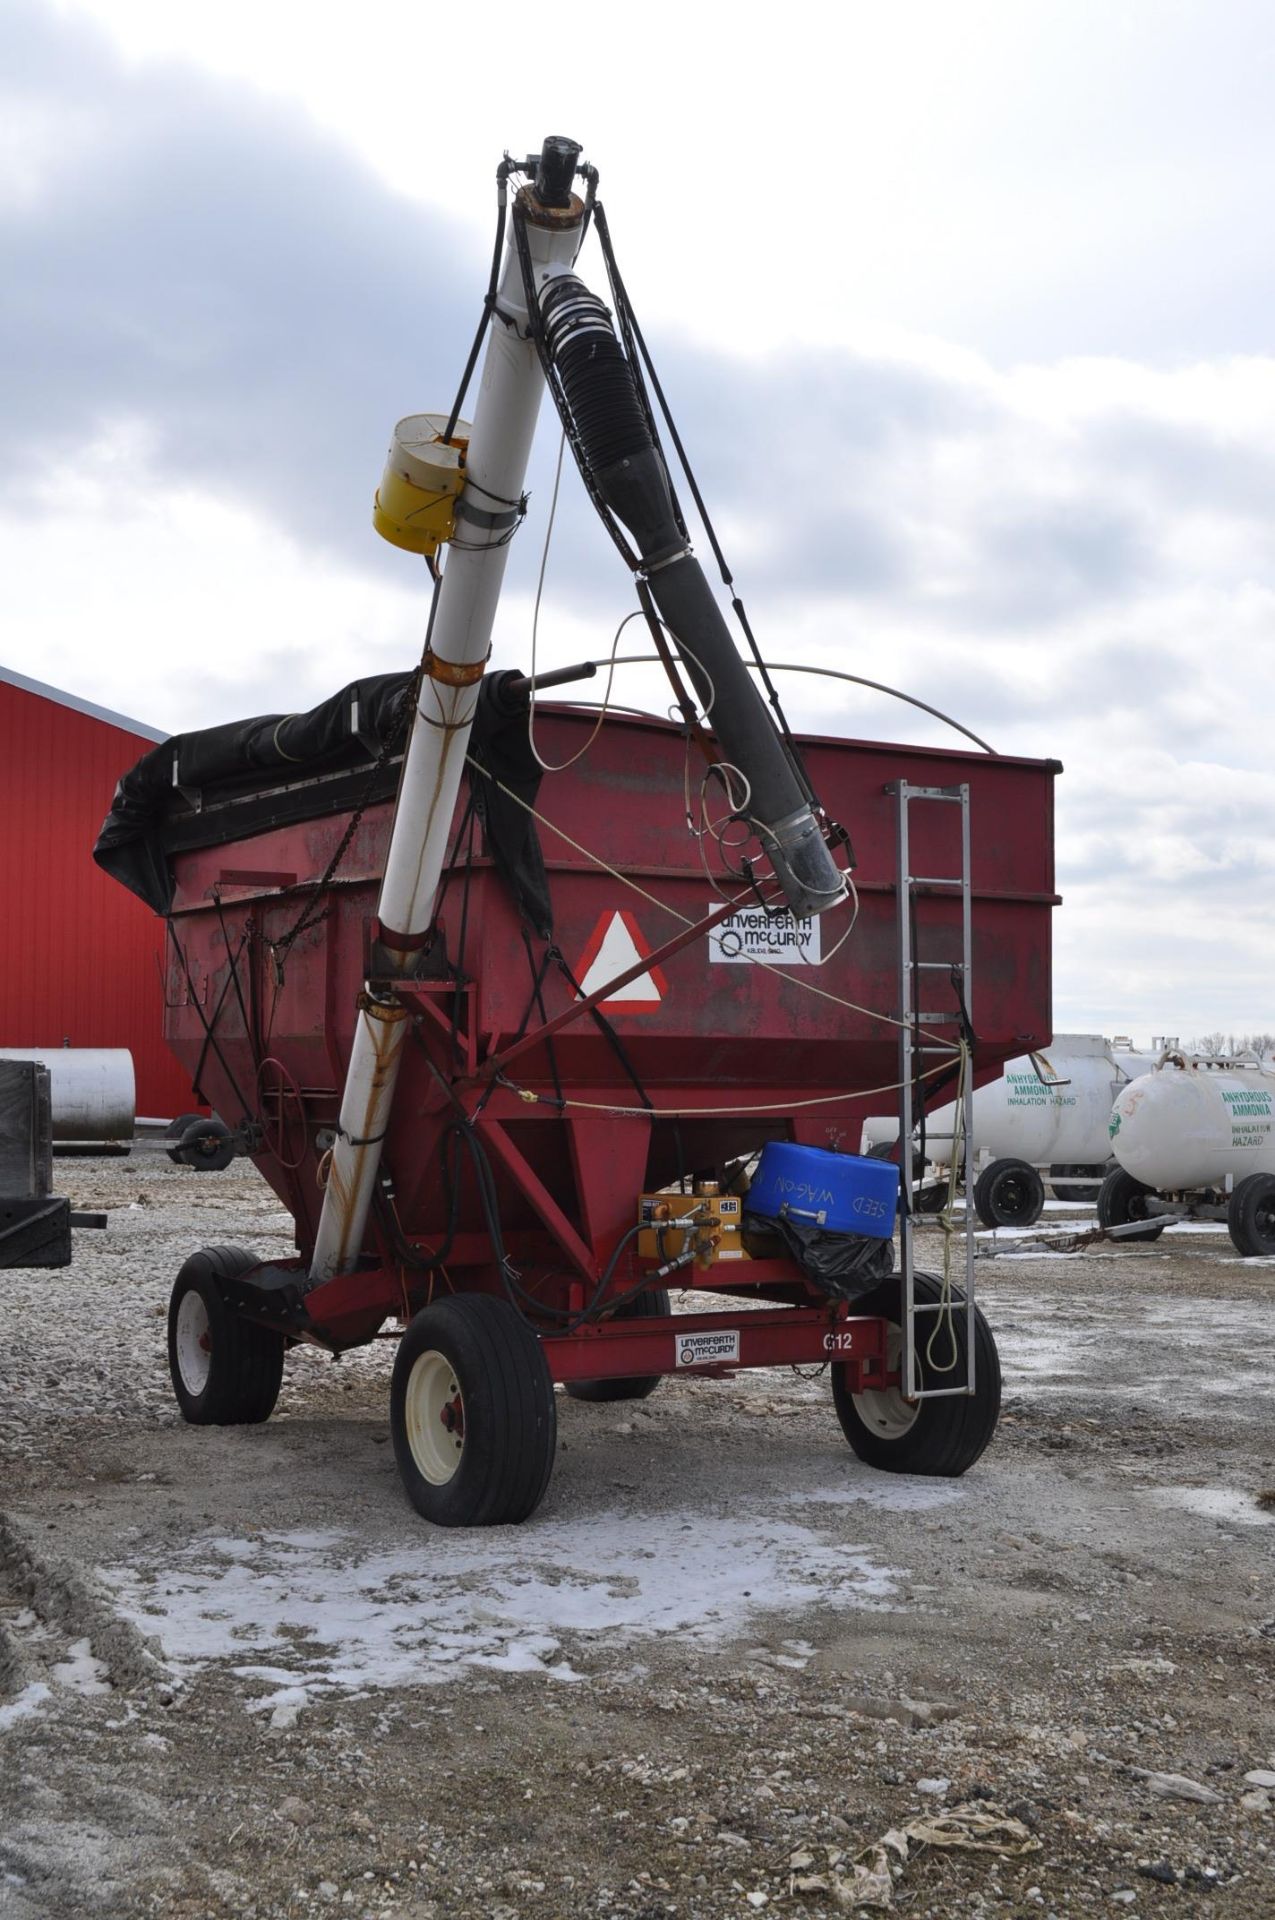 Unverferth McCurdy gravity wagon with gear, ploy cupped poly tube auger, hyd power unit - Image 5 of 7